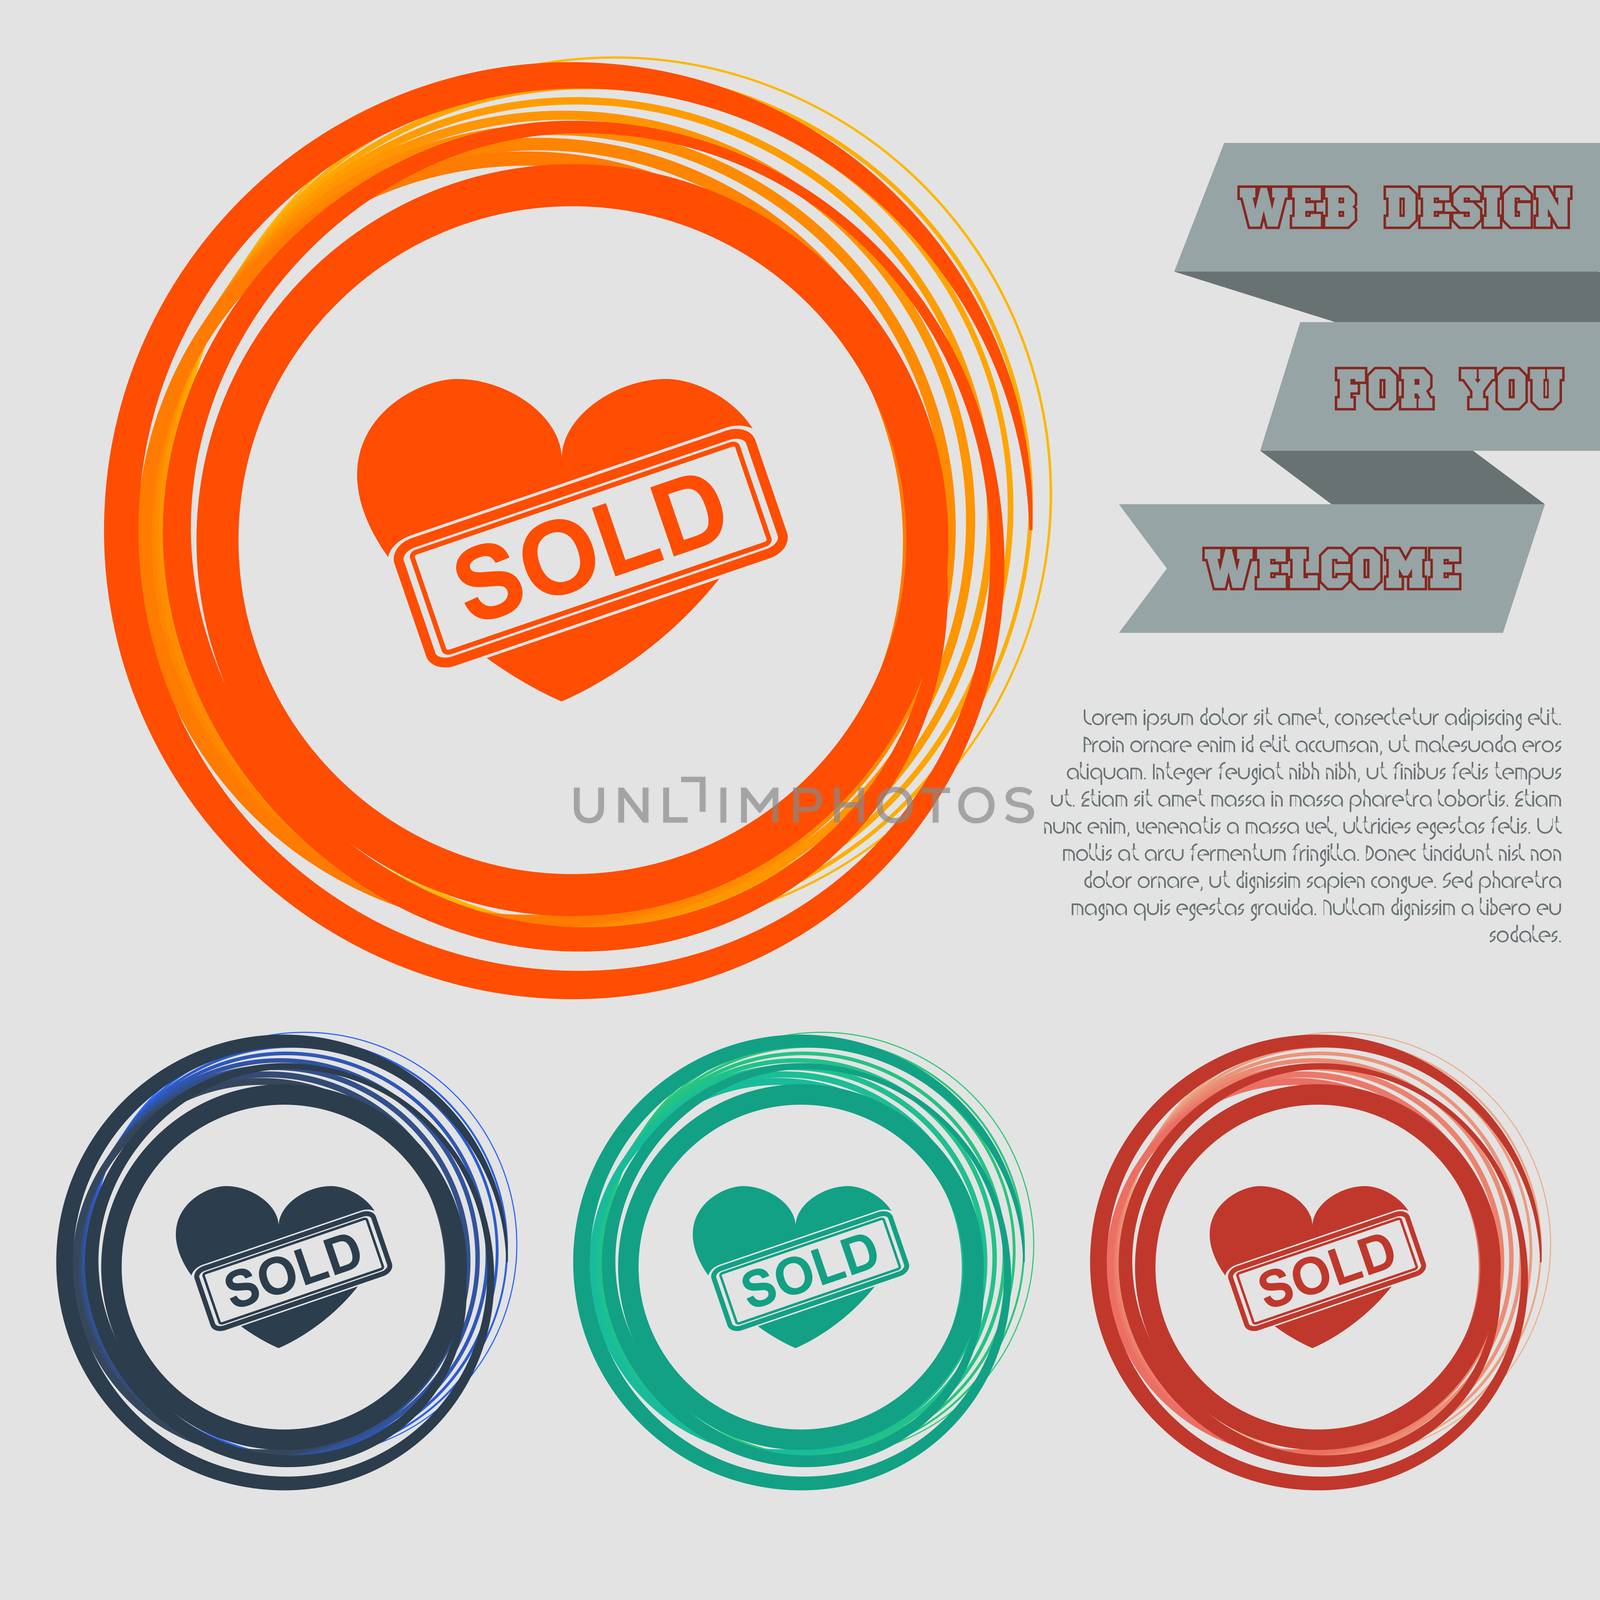 Heart icon on the red, blue, green, orange buttons for your website and design with space text. illustration